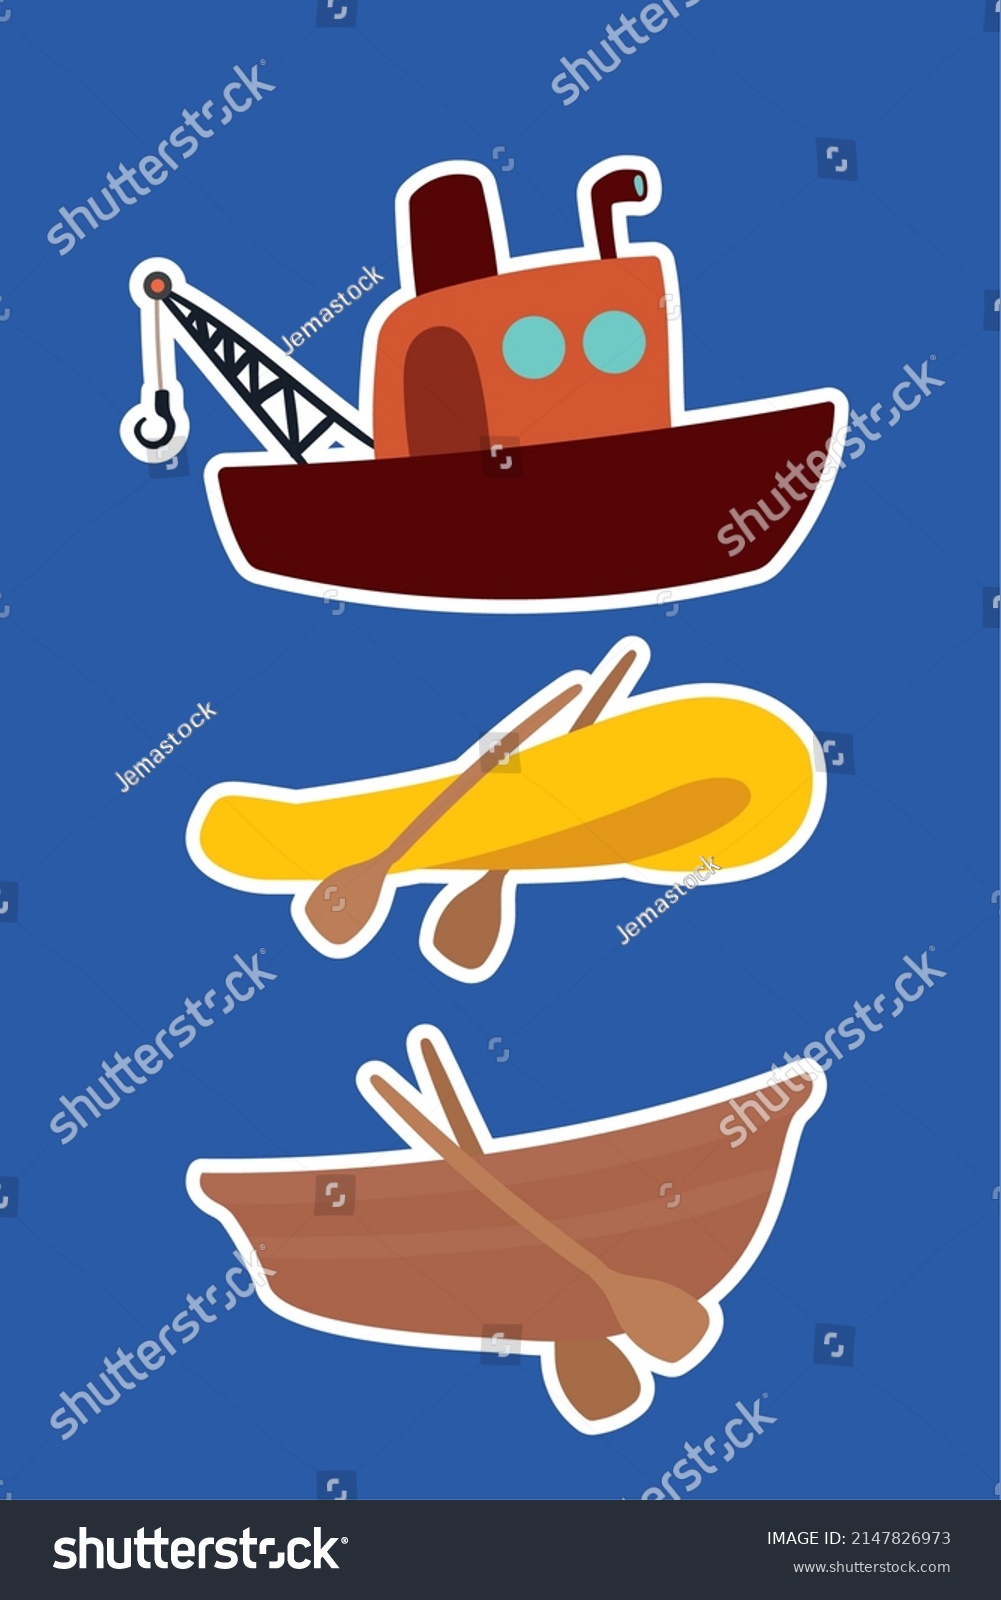 SVG of three ships and boats icons svg